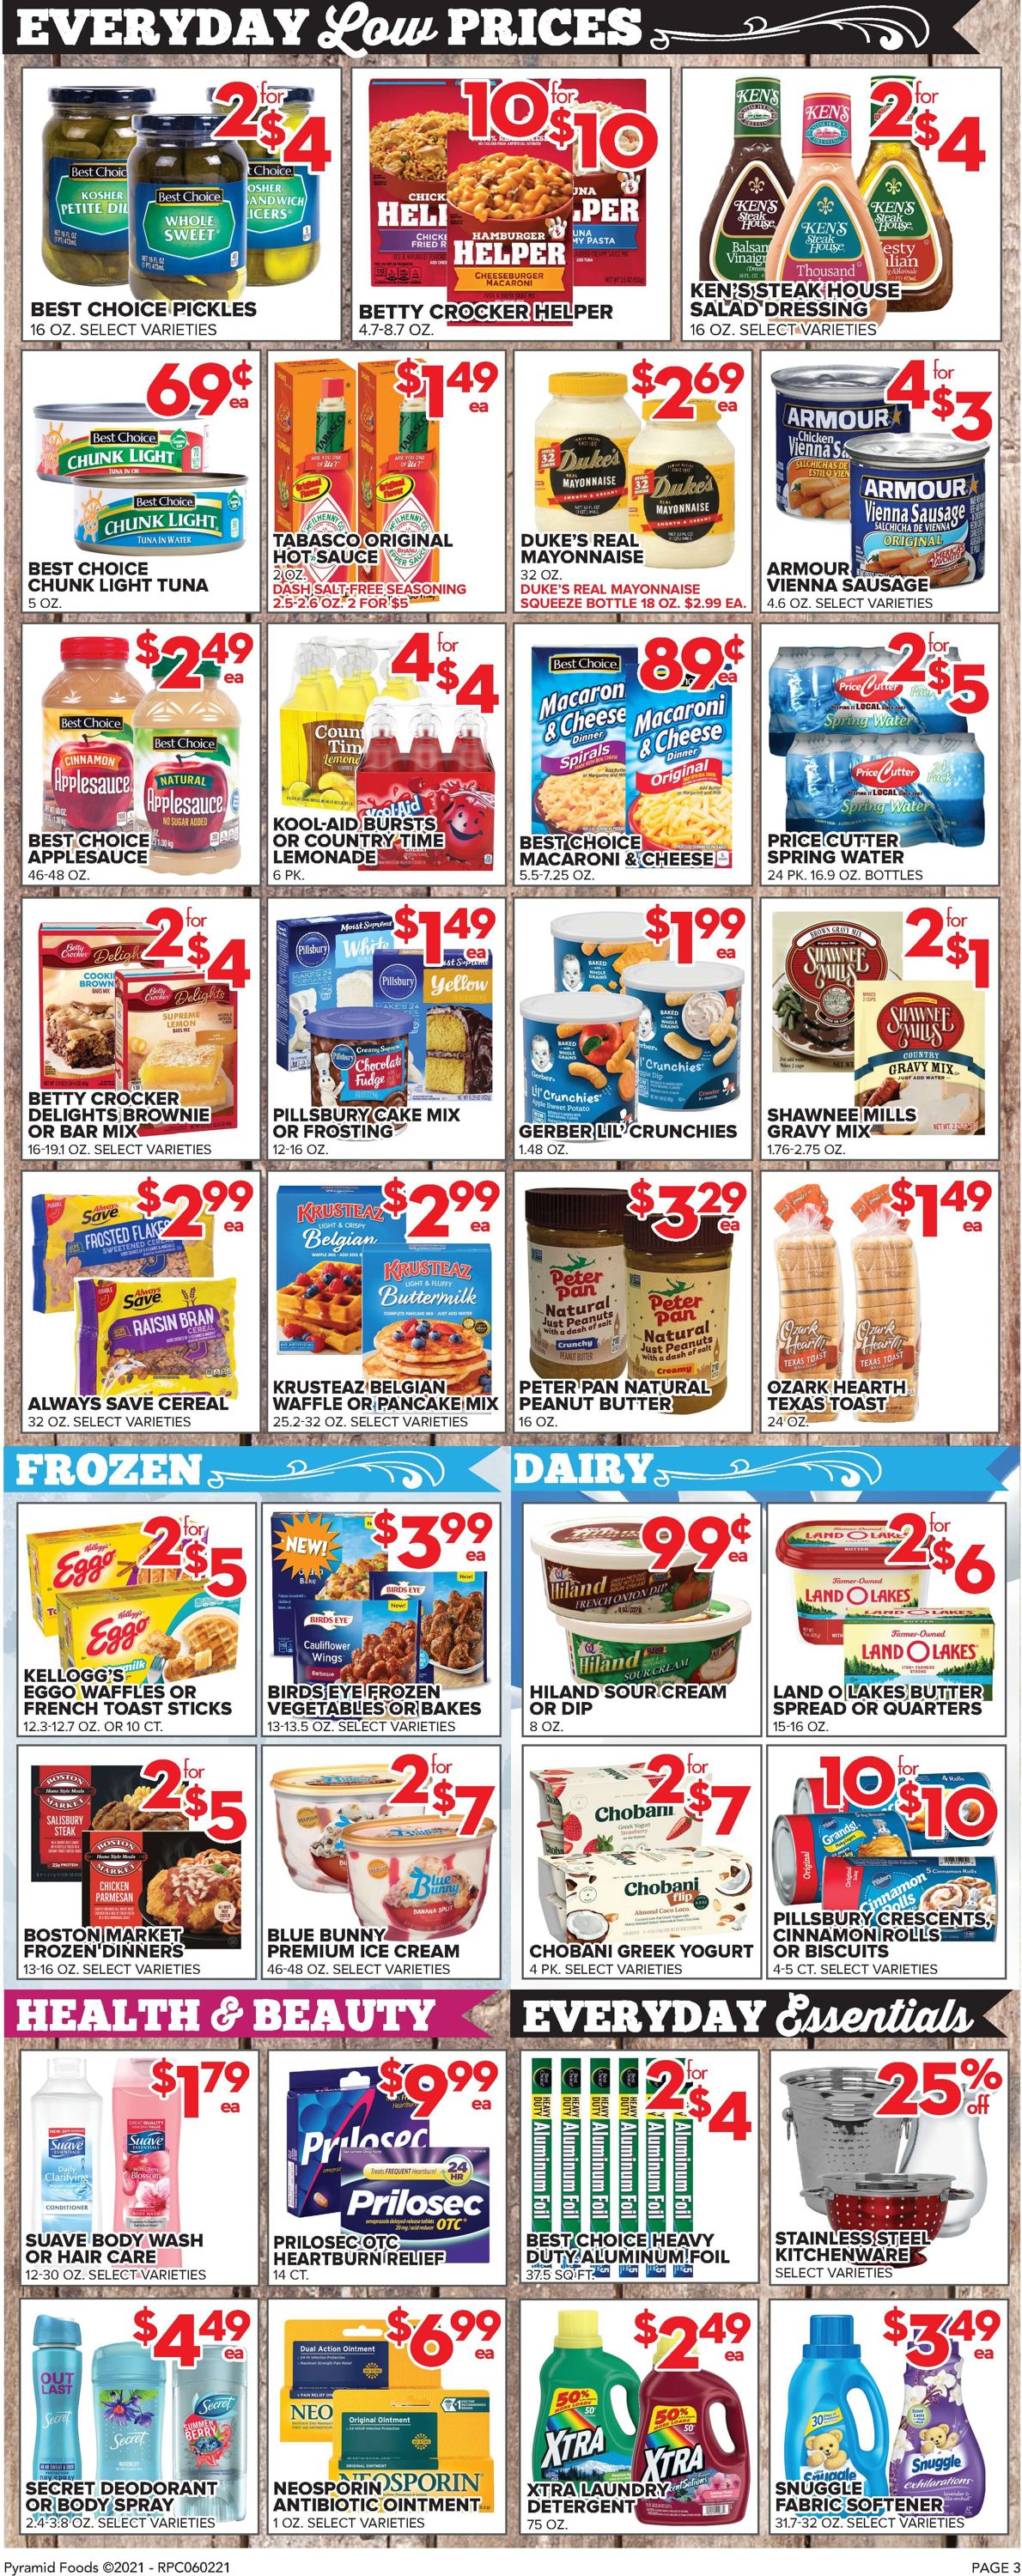 Price Cutter Weekly Ad Circular - valid 06/02-06/08/2021 (Page 3)